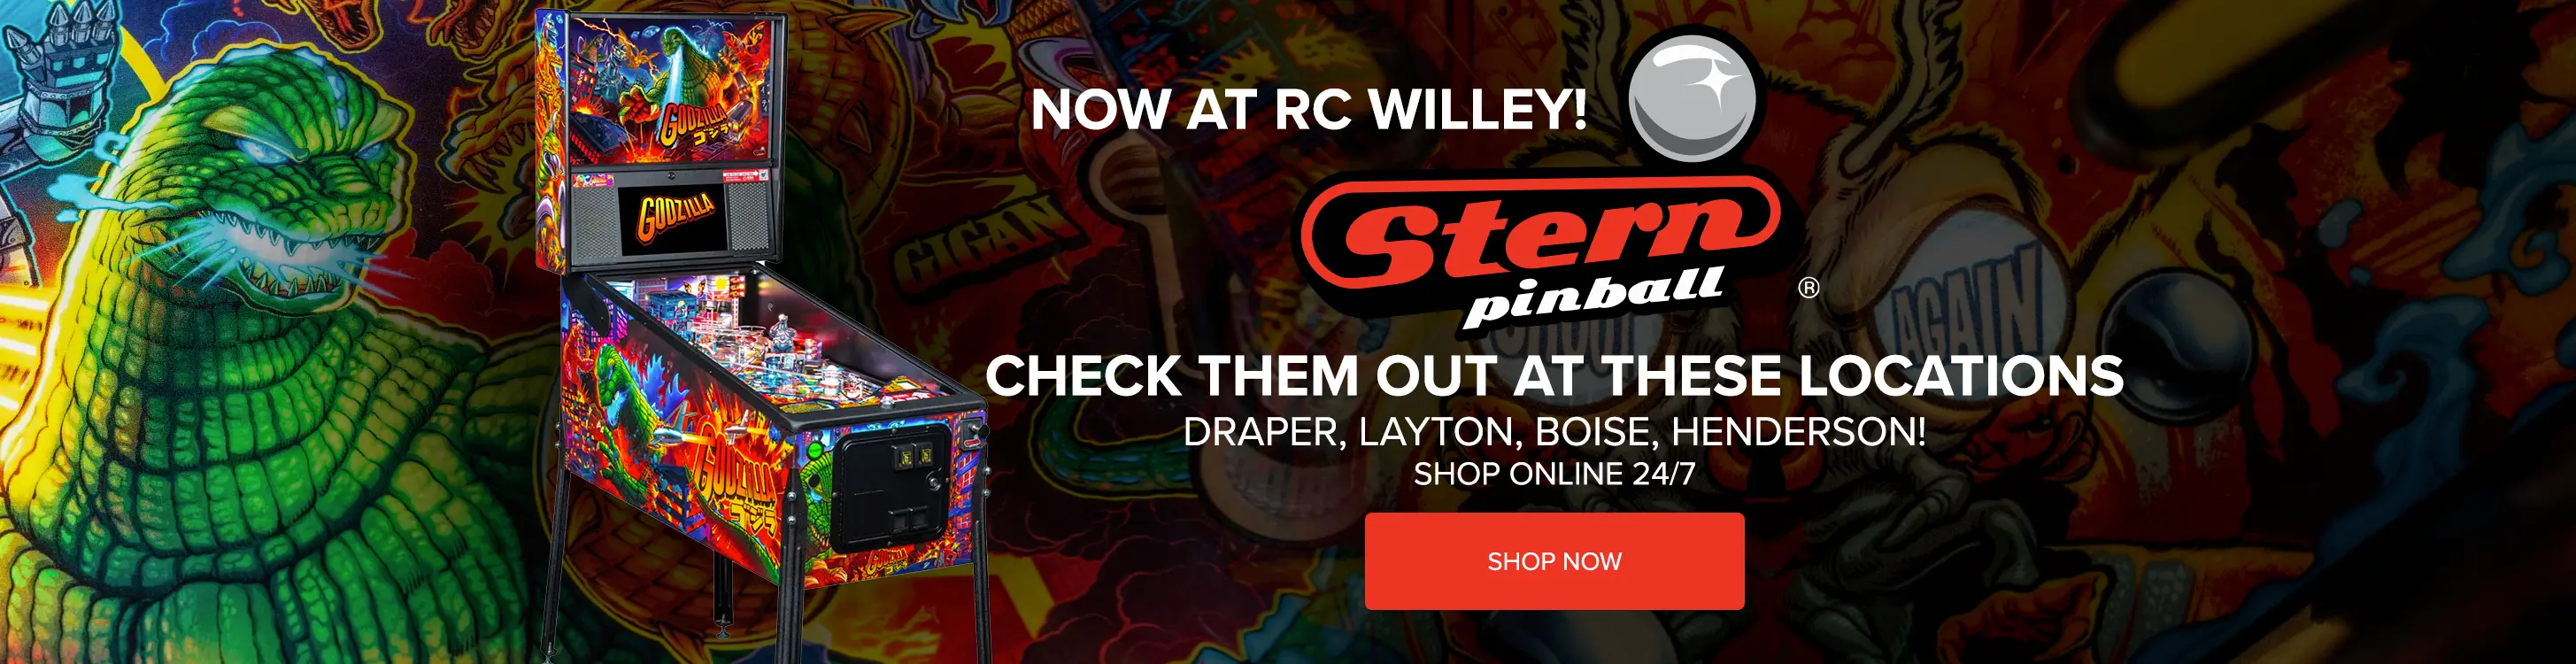 Stern Pinball Machines now at RC Willey! Check them out at the following locations: Draper, Layton, Boise, Henderson.